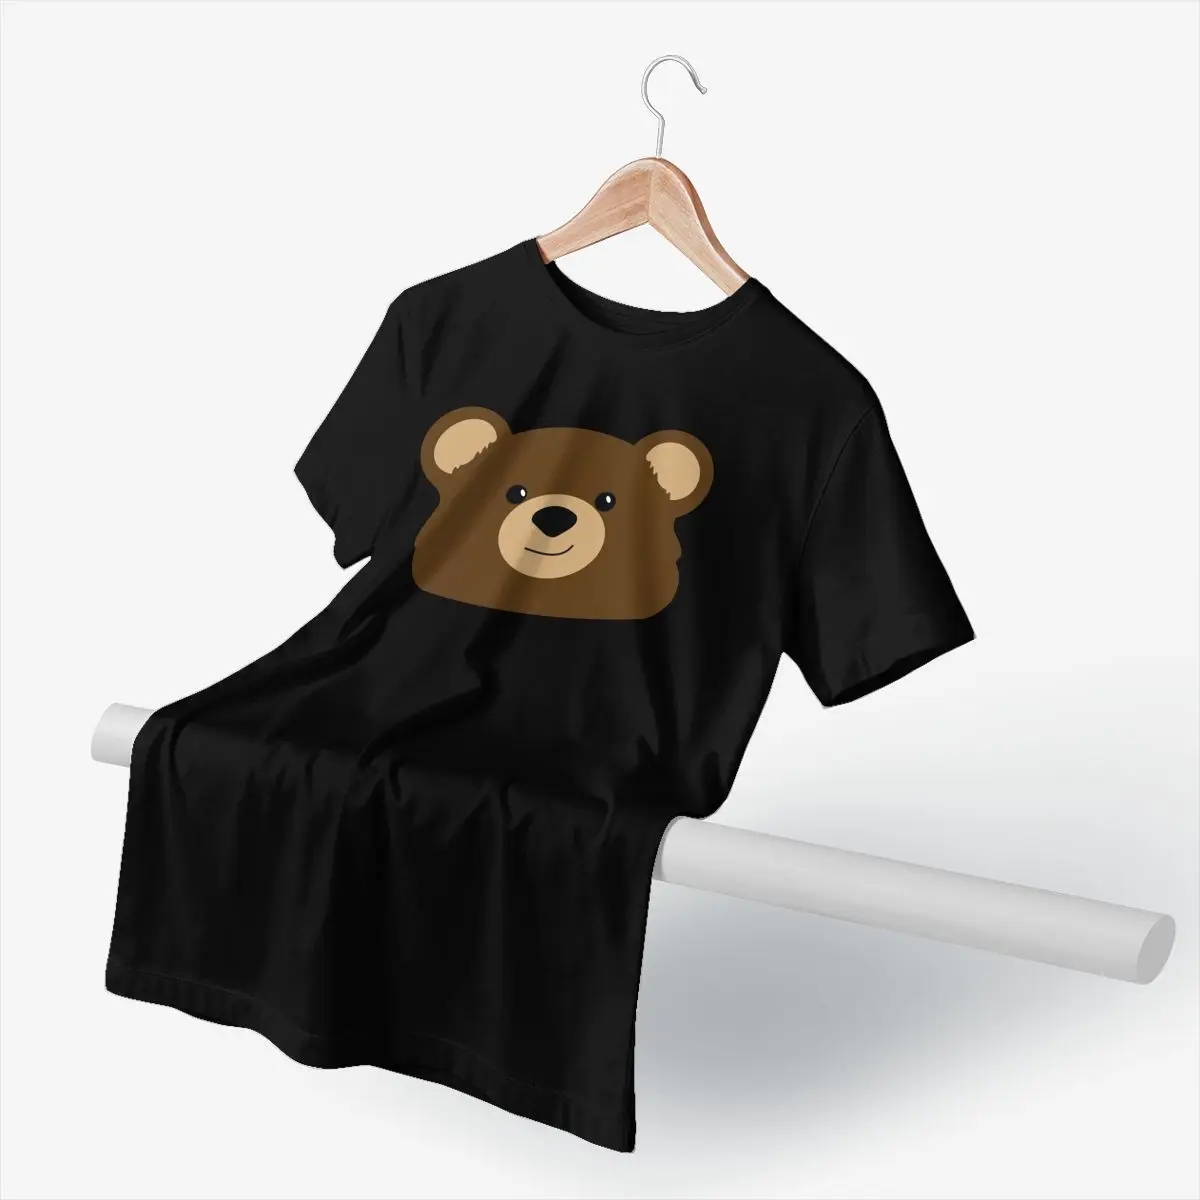 Details about   .Infant creeper bodysuit One Piece t-shirt Teddy Bears k-546 